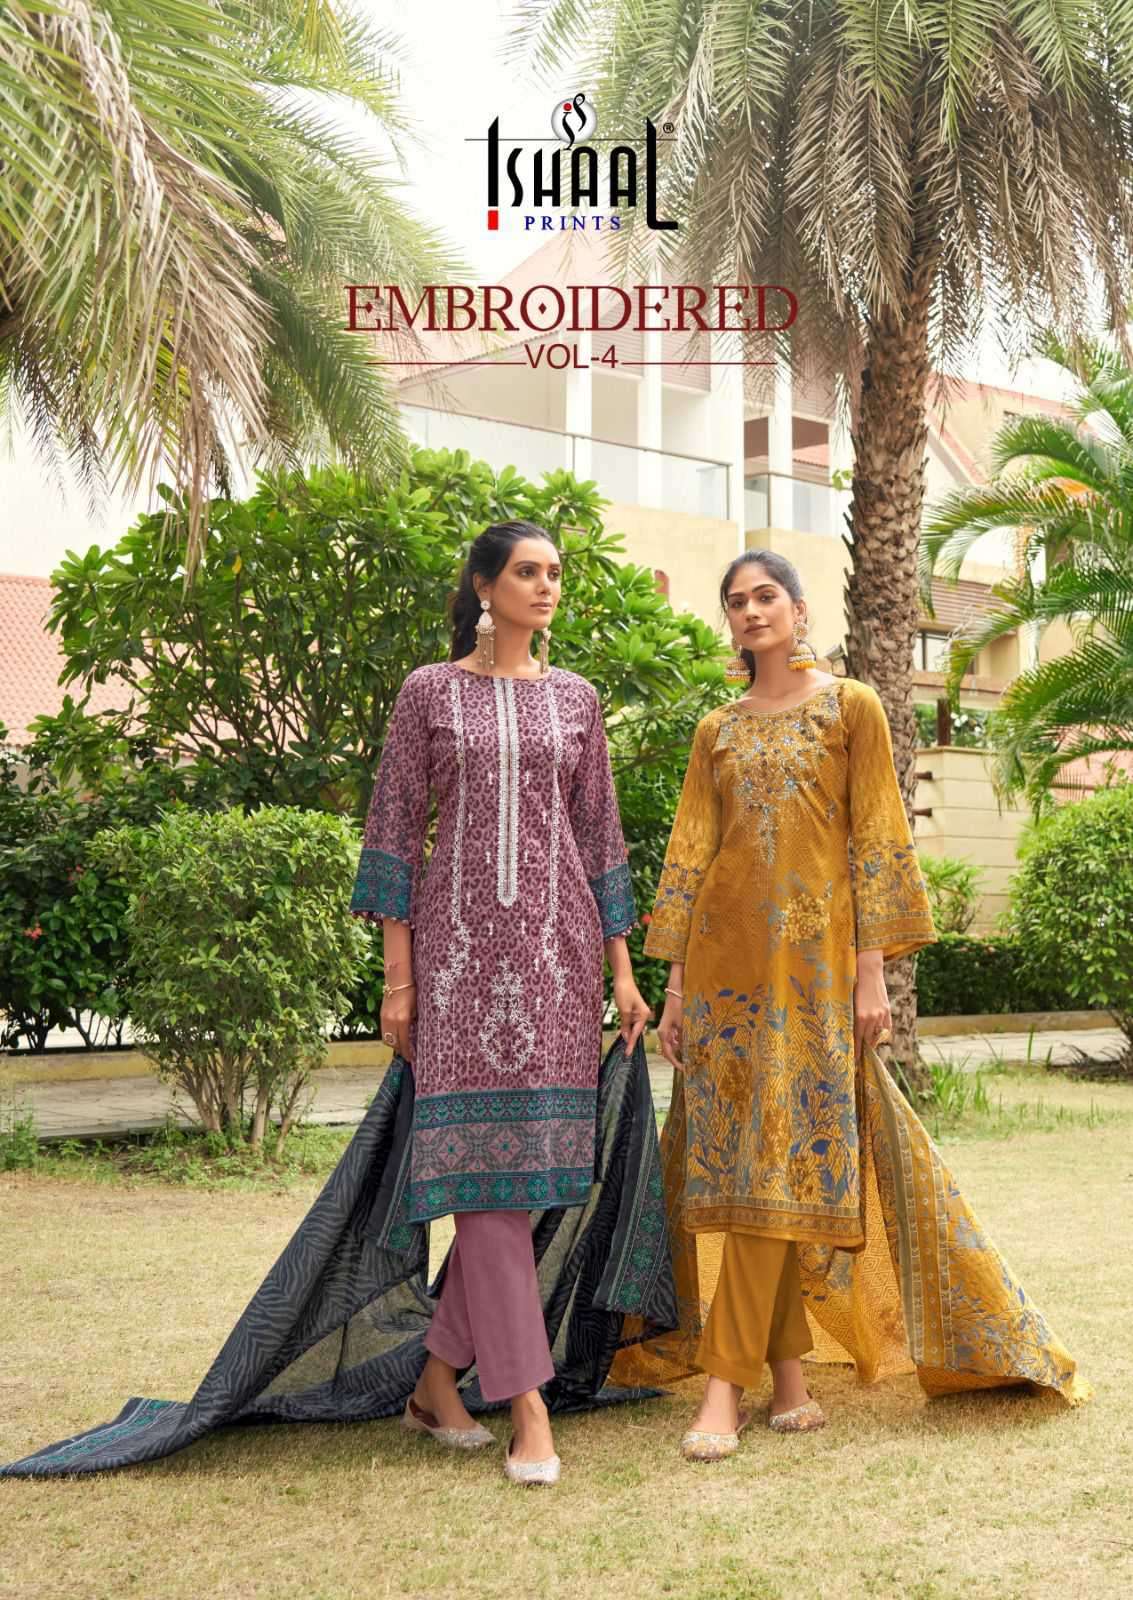 Ishaal Embroidered Vol 4 Pure Lawn Fancy Salwar Suit Catalog Wholesaler